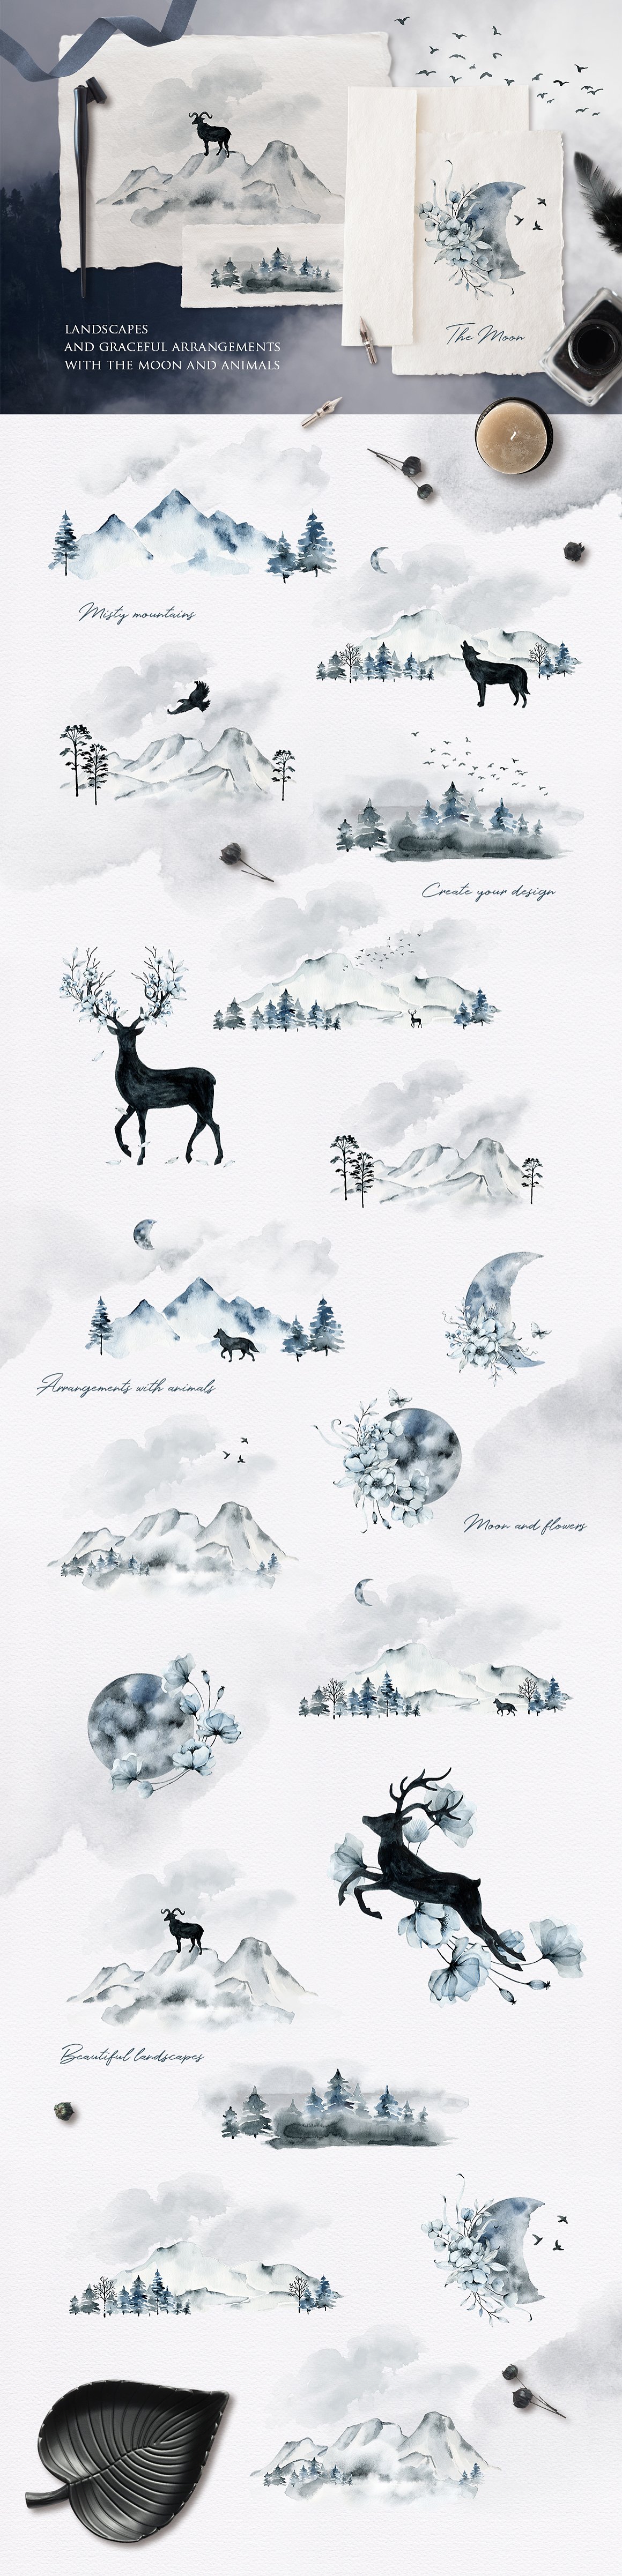 So cool watercolor mountains compositions.